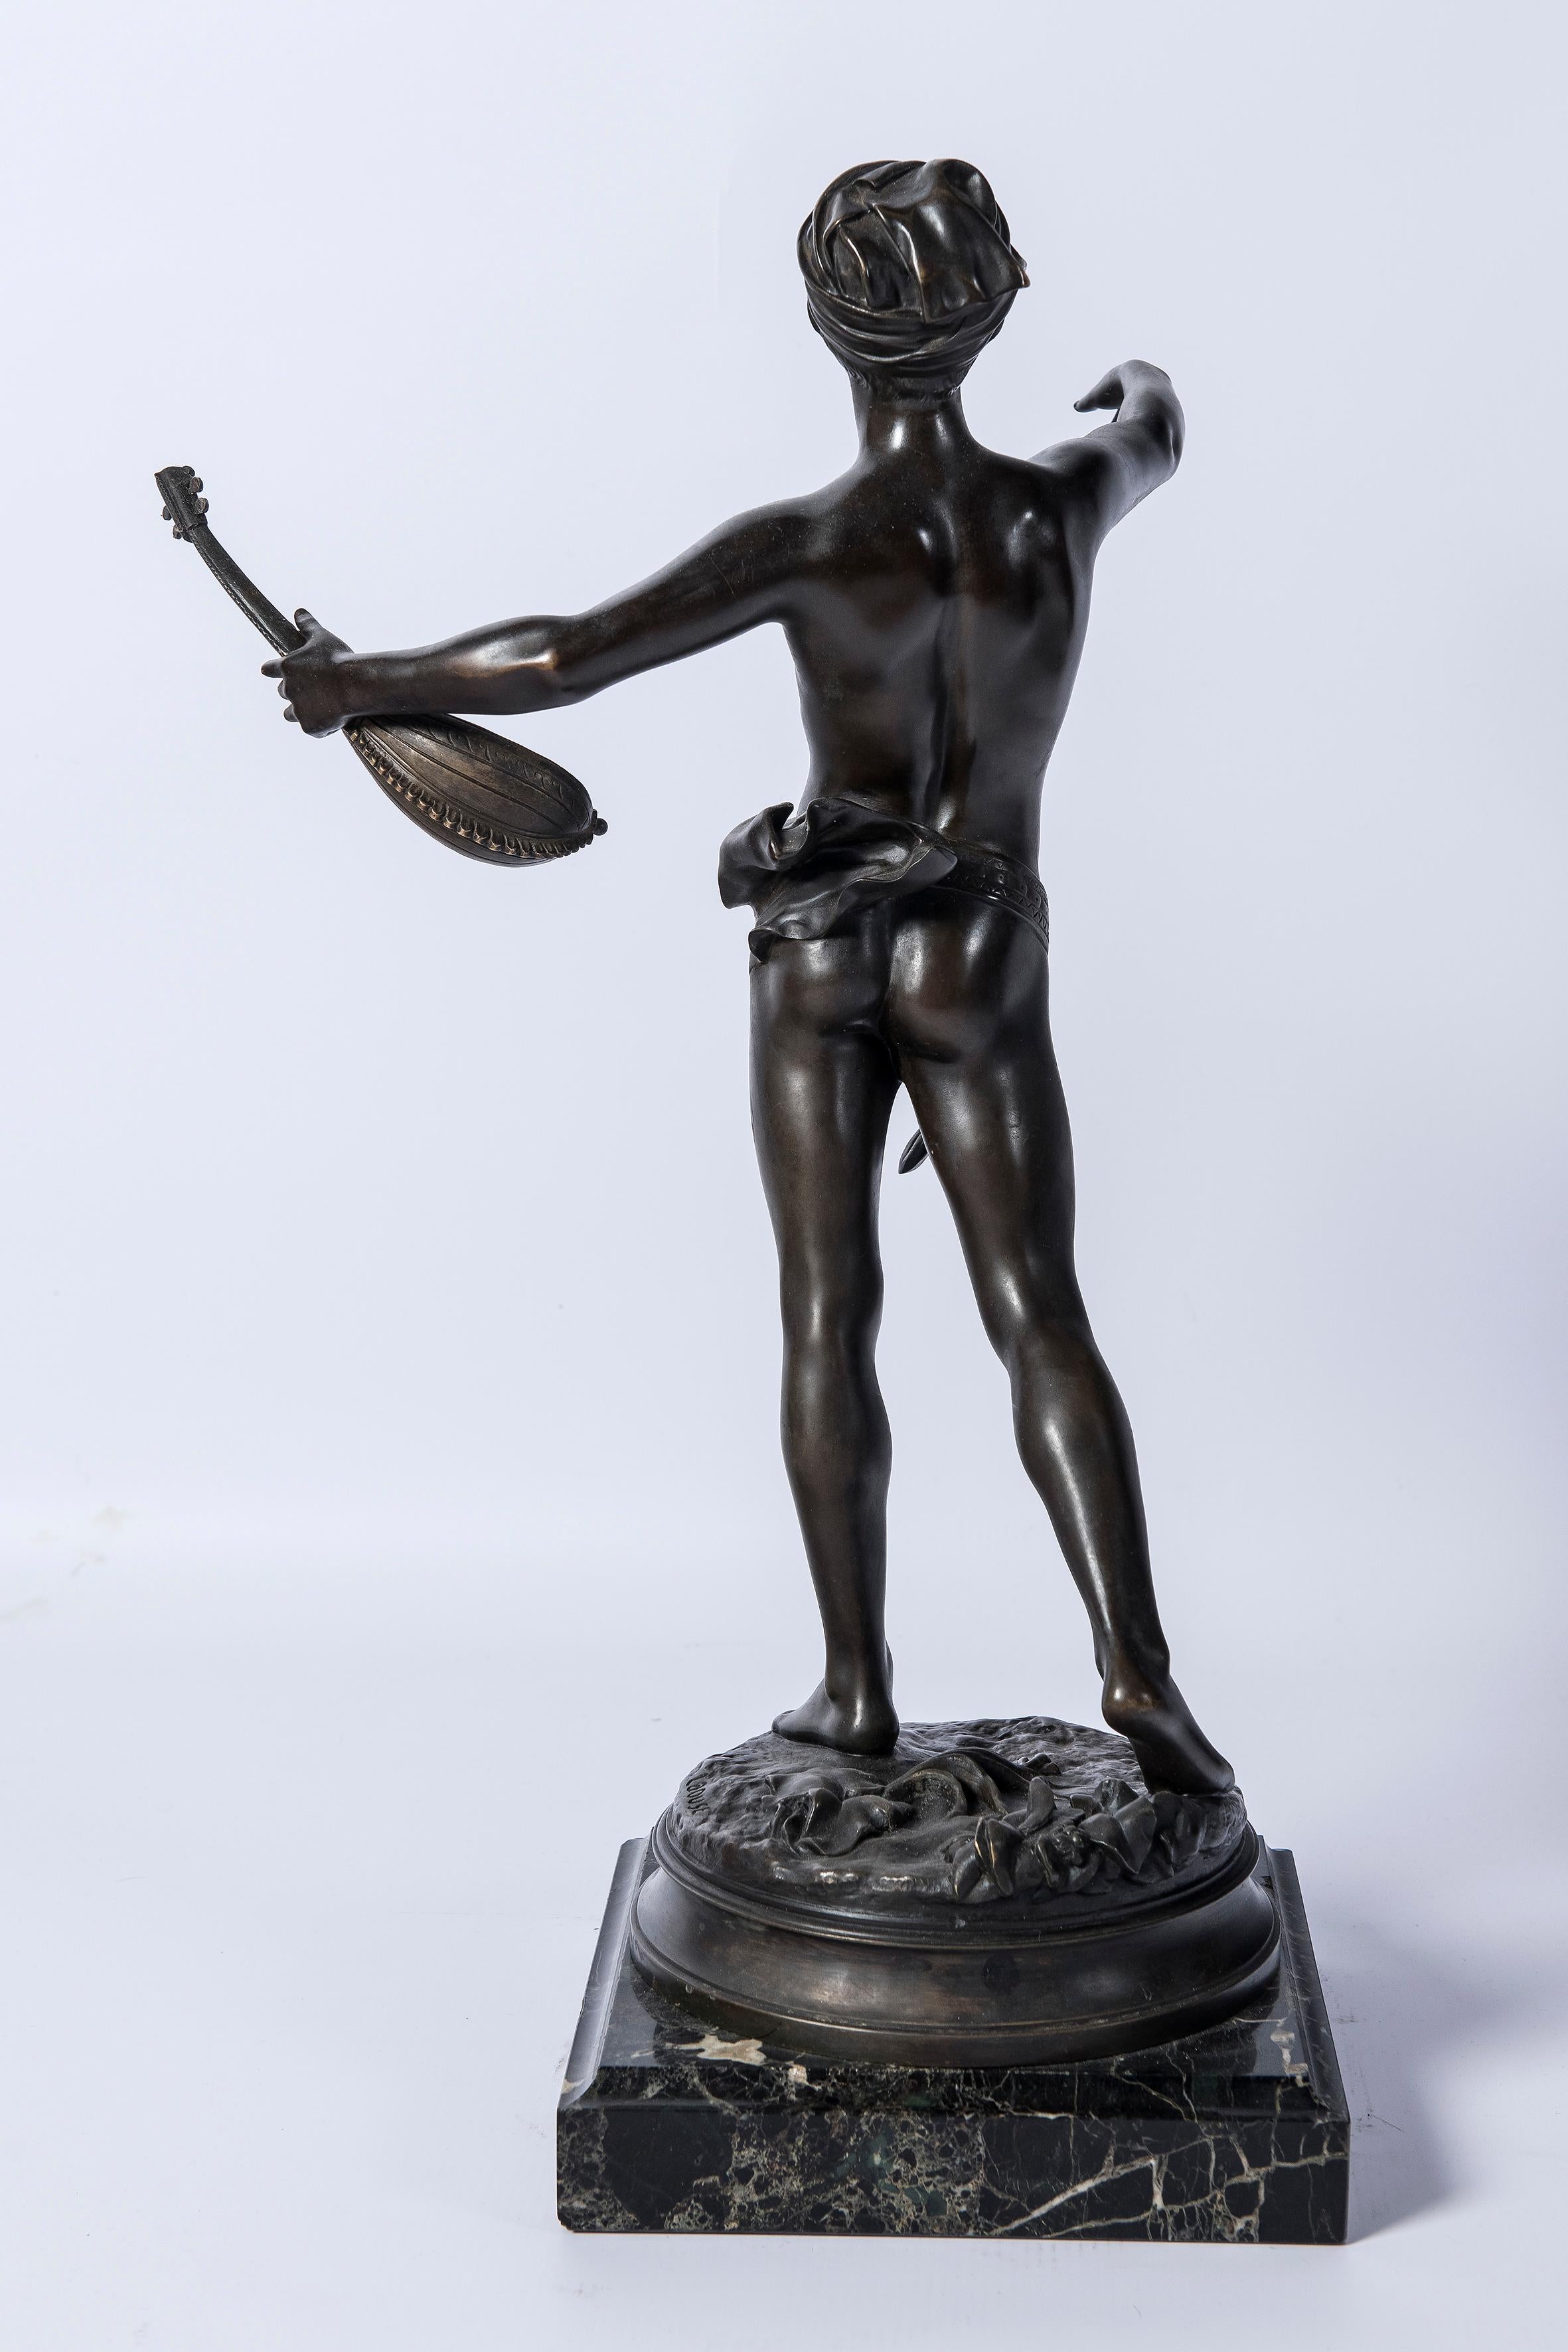 Bronze sculpture, signed Laouse. France, circa 1900.
Marble base.